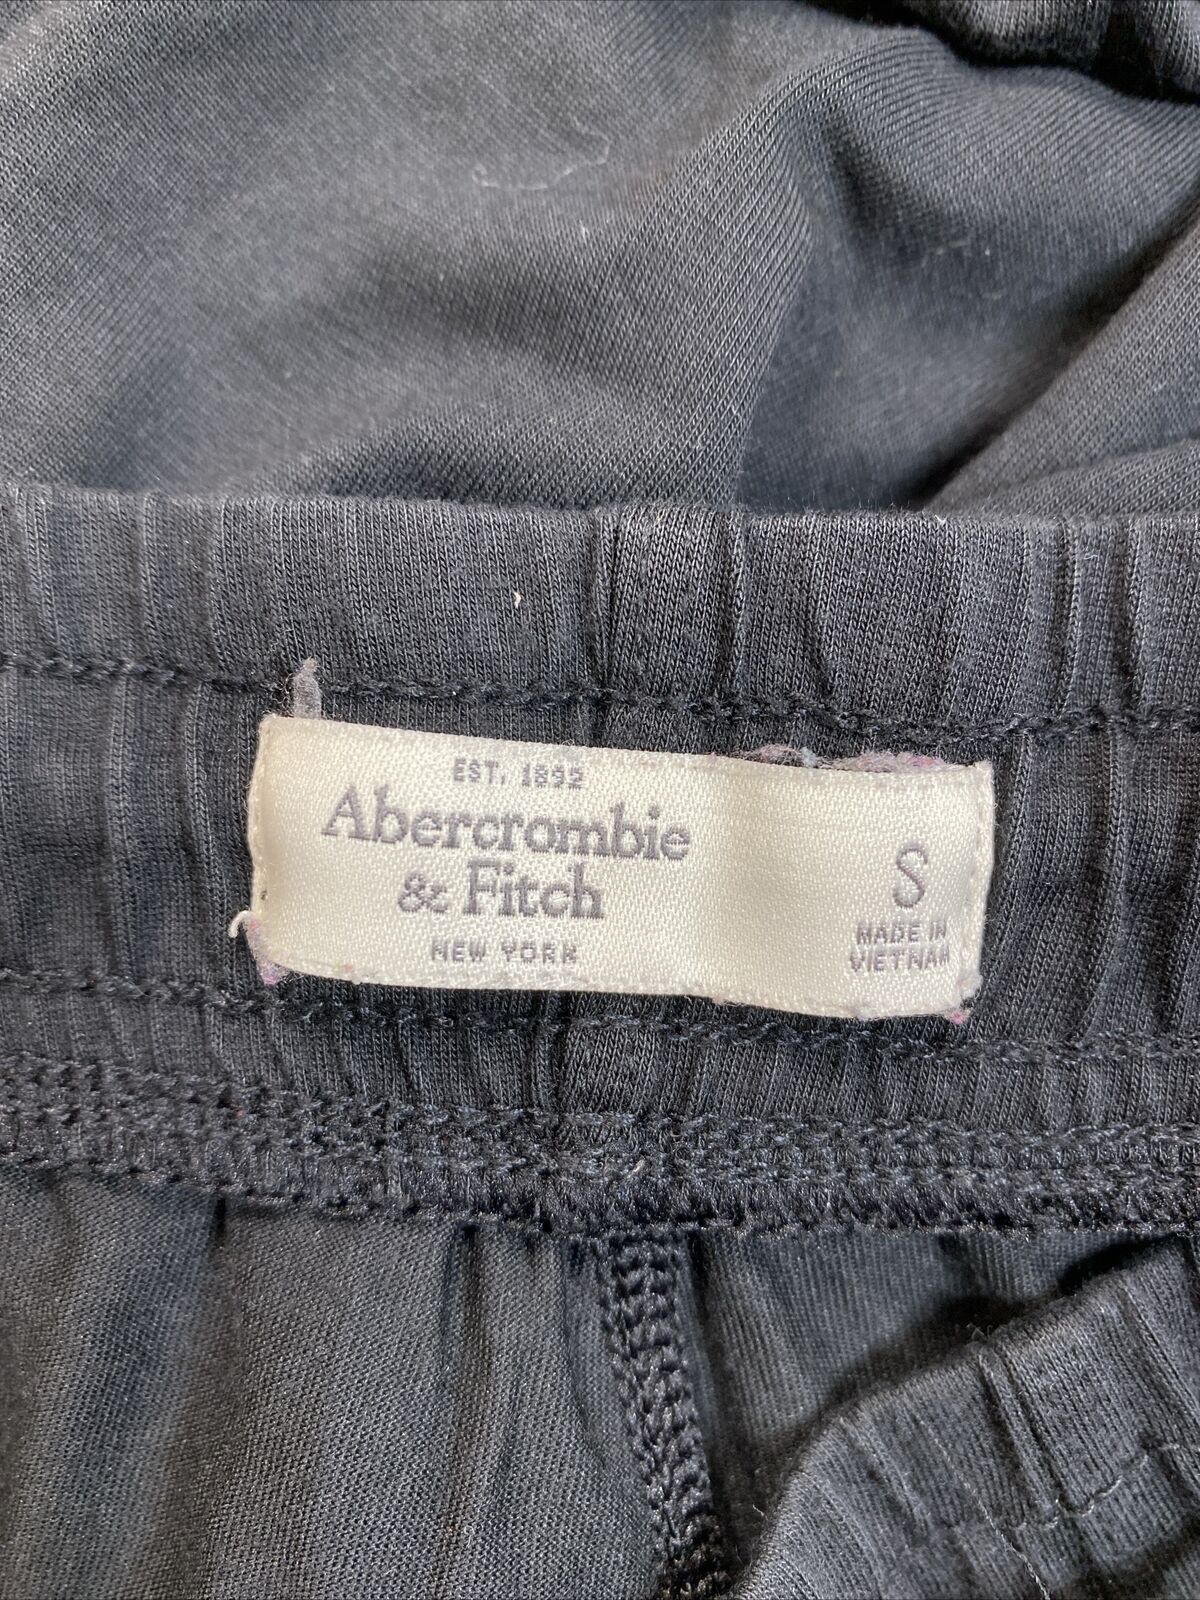 Abercrombie and Fitch Women's Black Thin Basic Jogger Pants - S